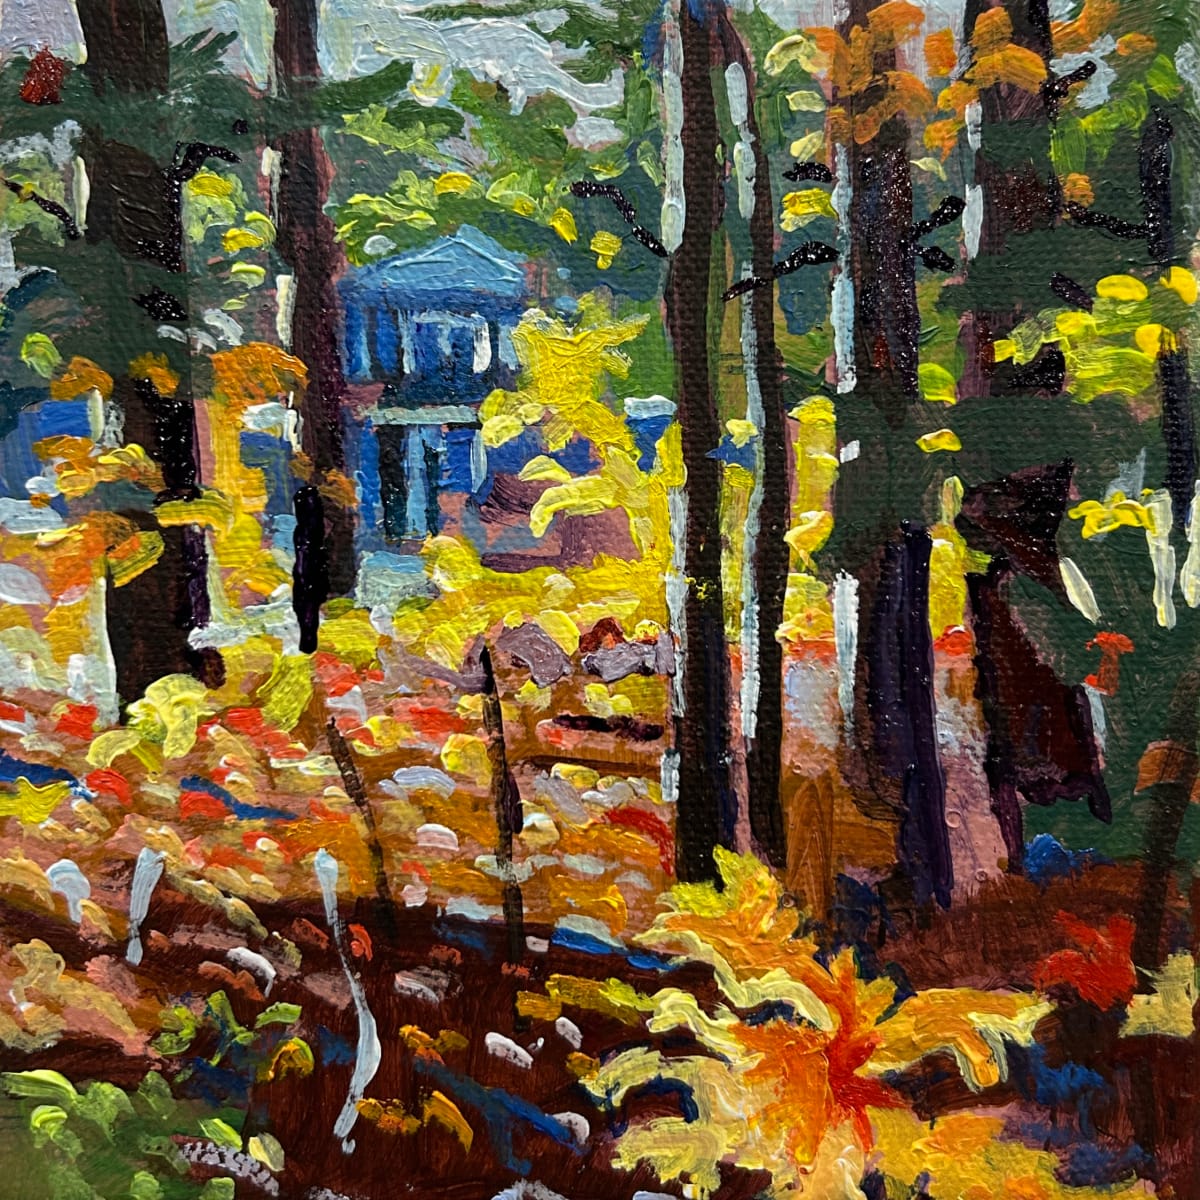 Cottage Blue, Kawartha Lakes. by Lynne Ryall  Image: A beautiful view through warm coloured trees to a blue cottage in the background